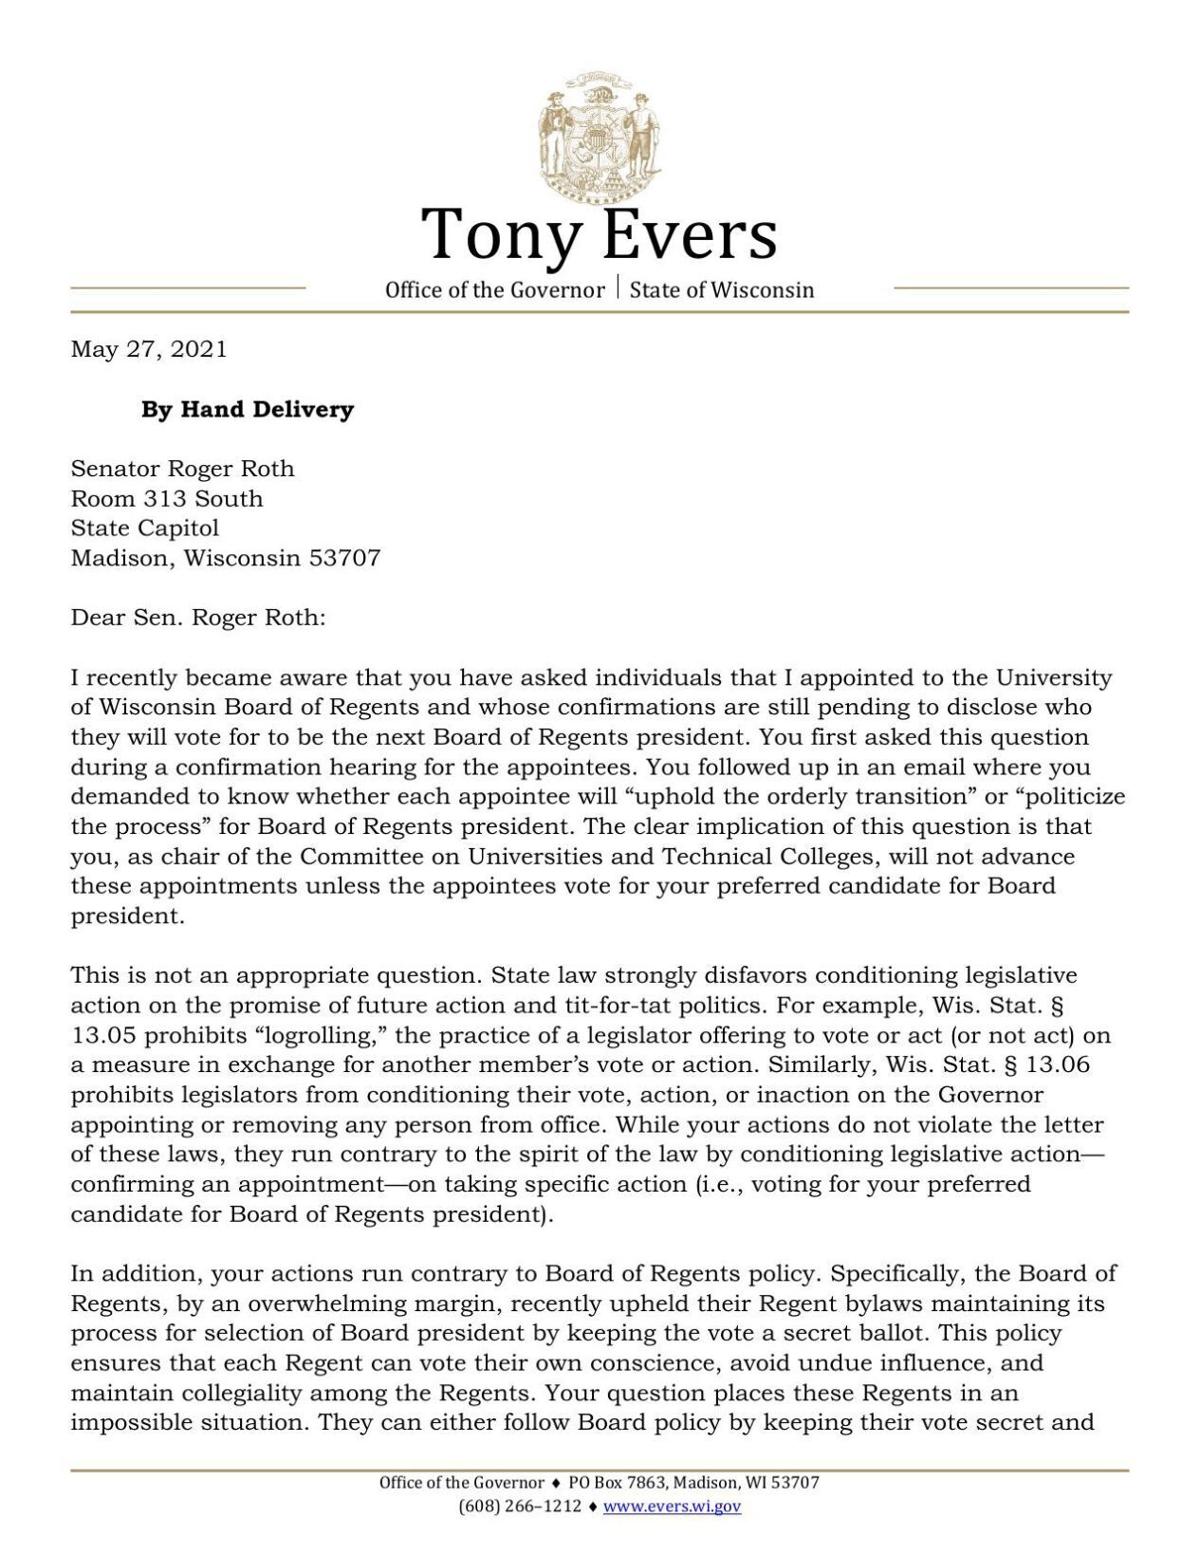 2021_05_27 Evers Letter to Sen Roth.pdf